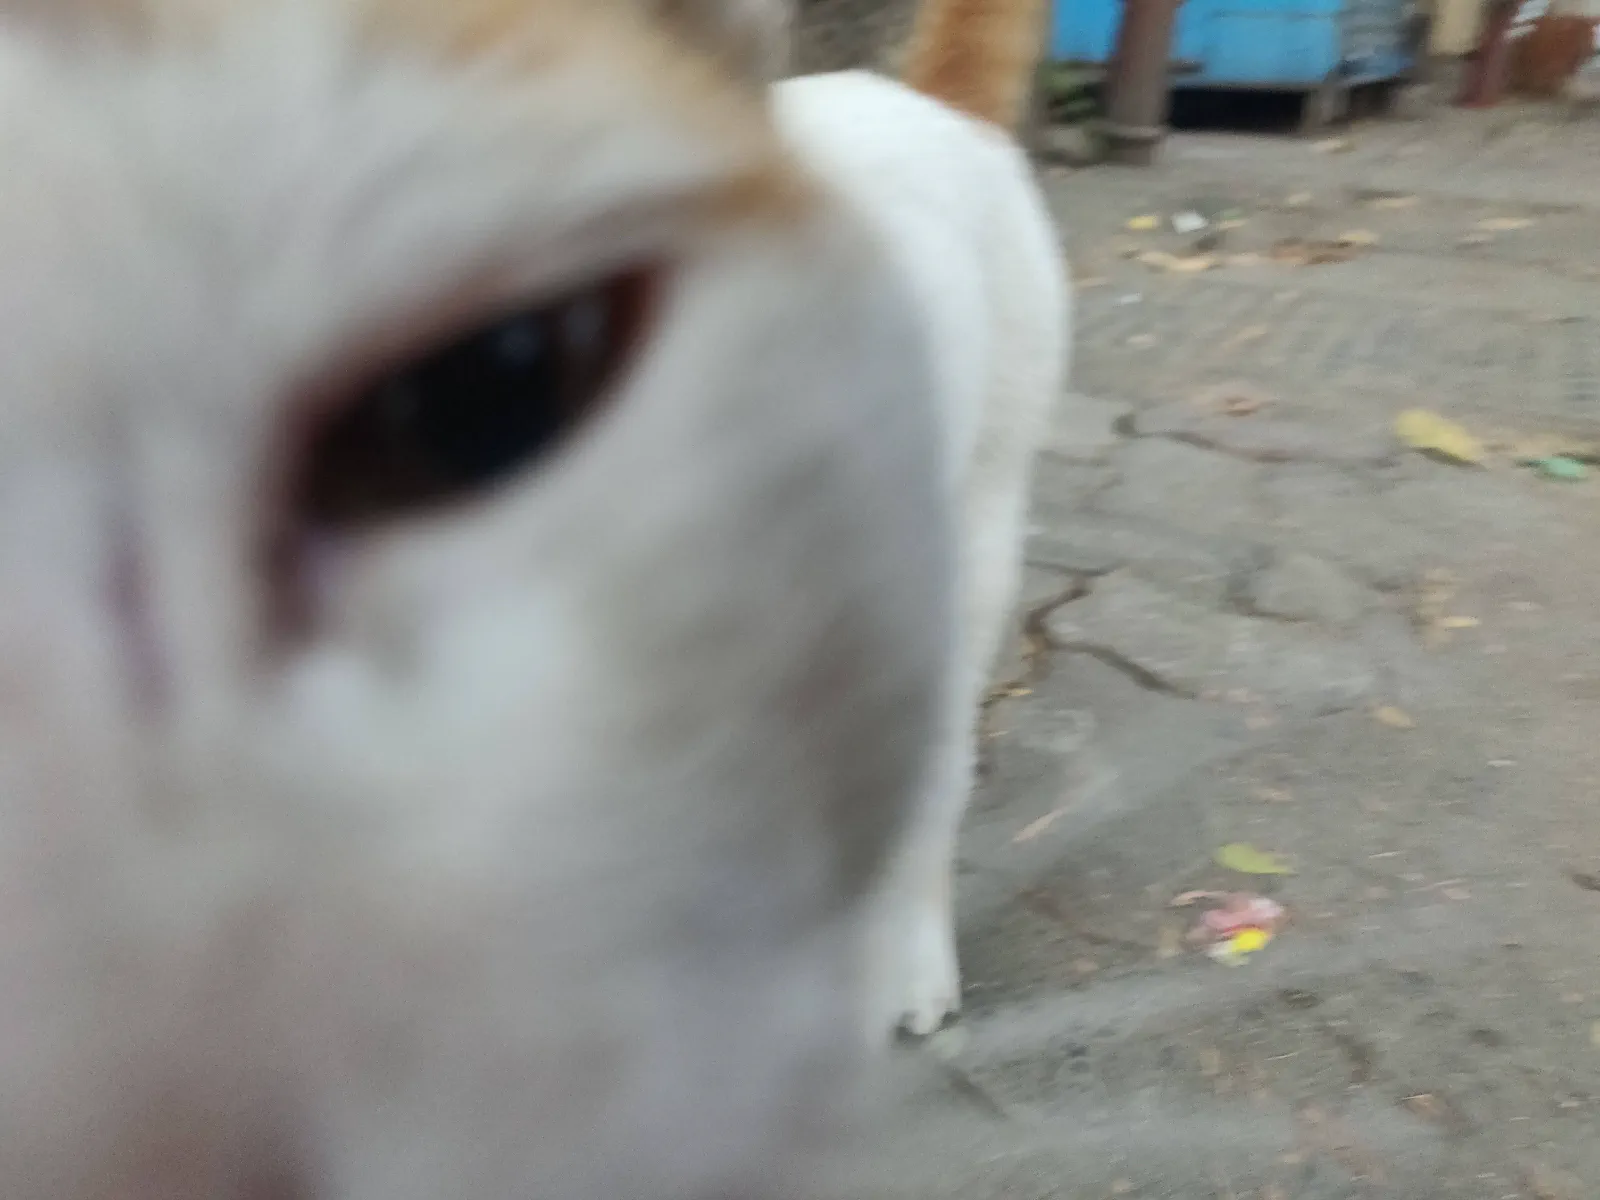 Cat licking the camera
